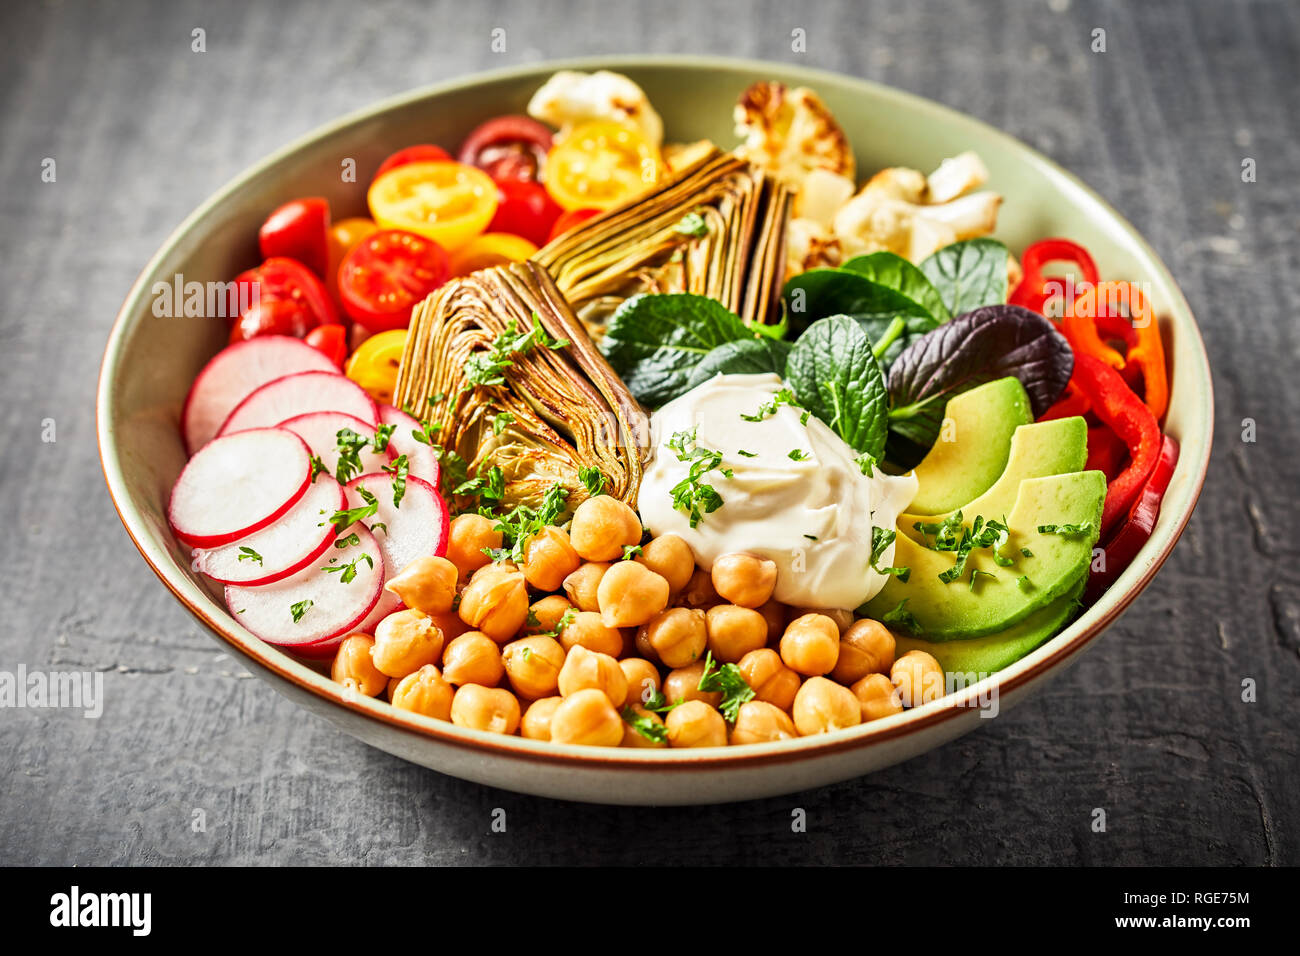 Colorful Buddha bowl with a variety of healthy fresh vegetables including chickpeas, avocado, radish, sweet pepper, tomatoes, cauliflower and artichok Stock Photo